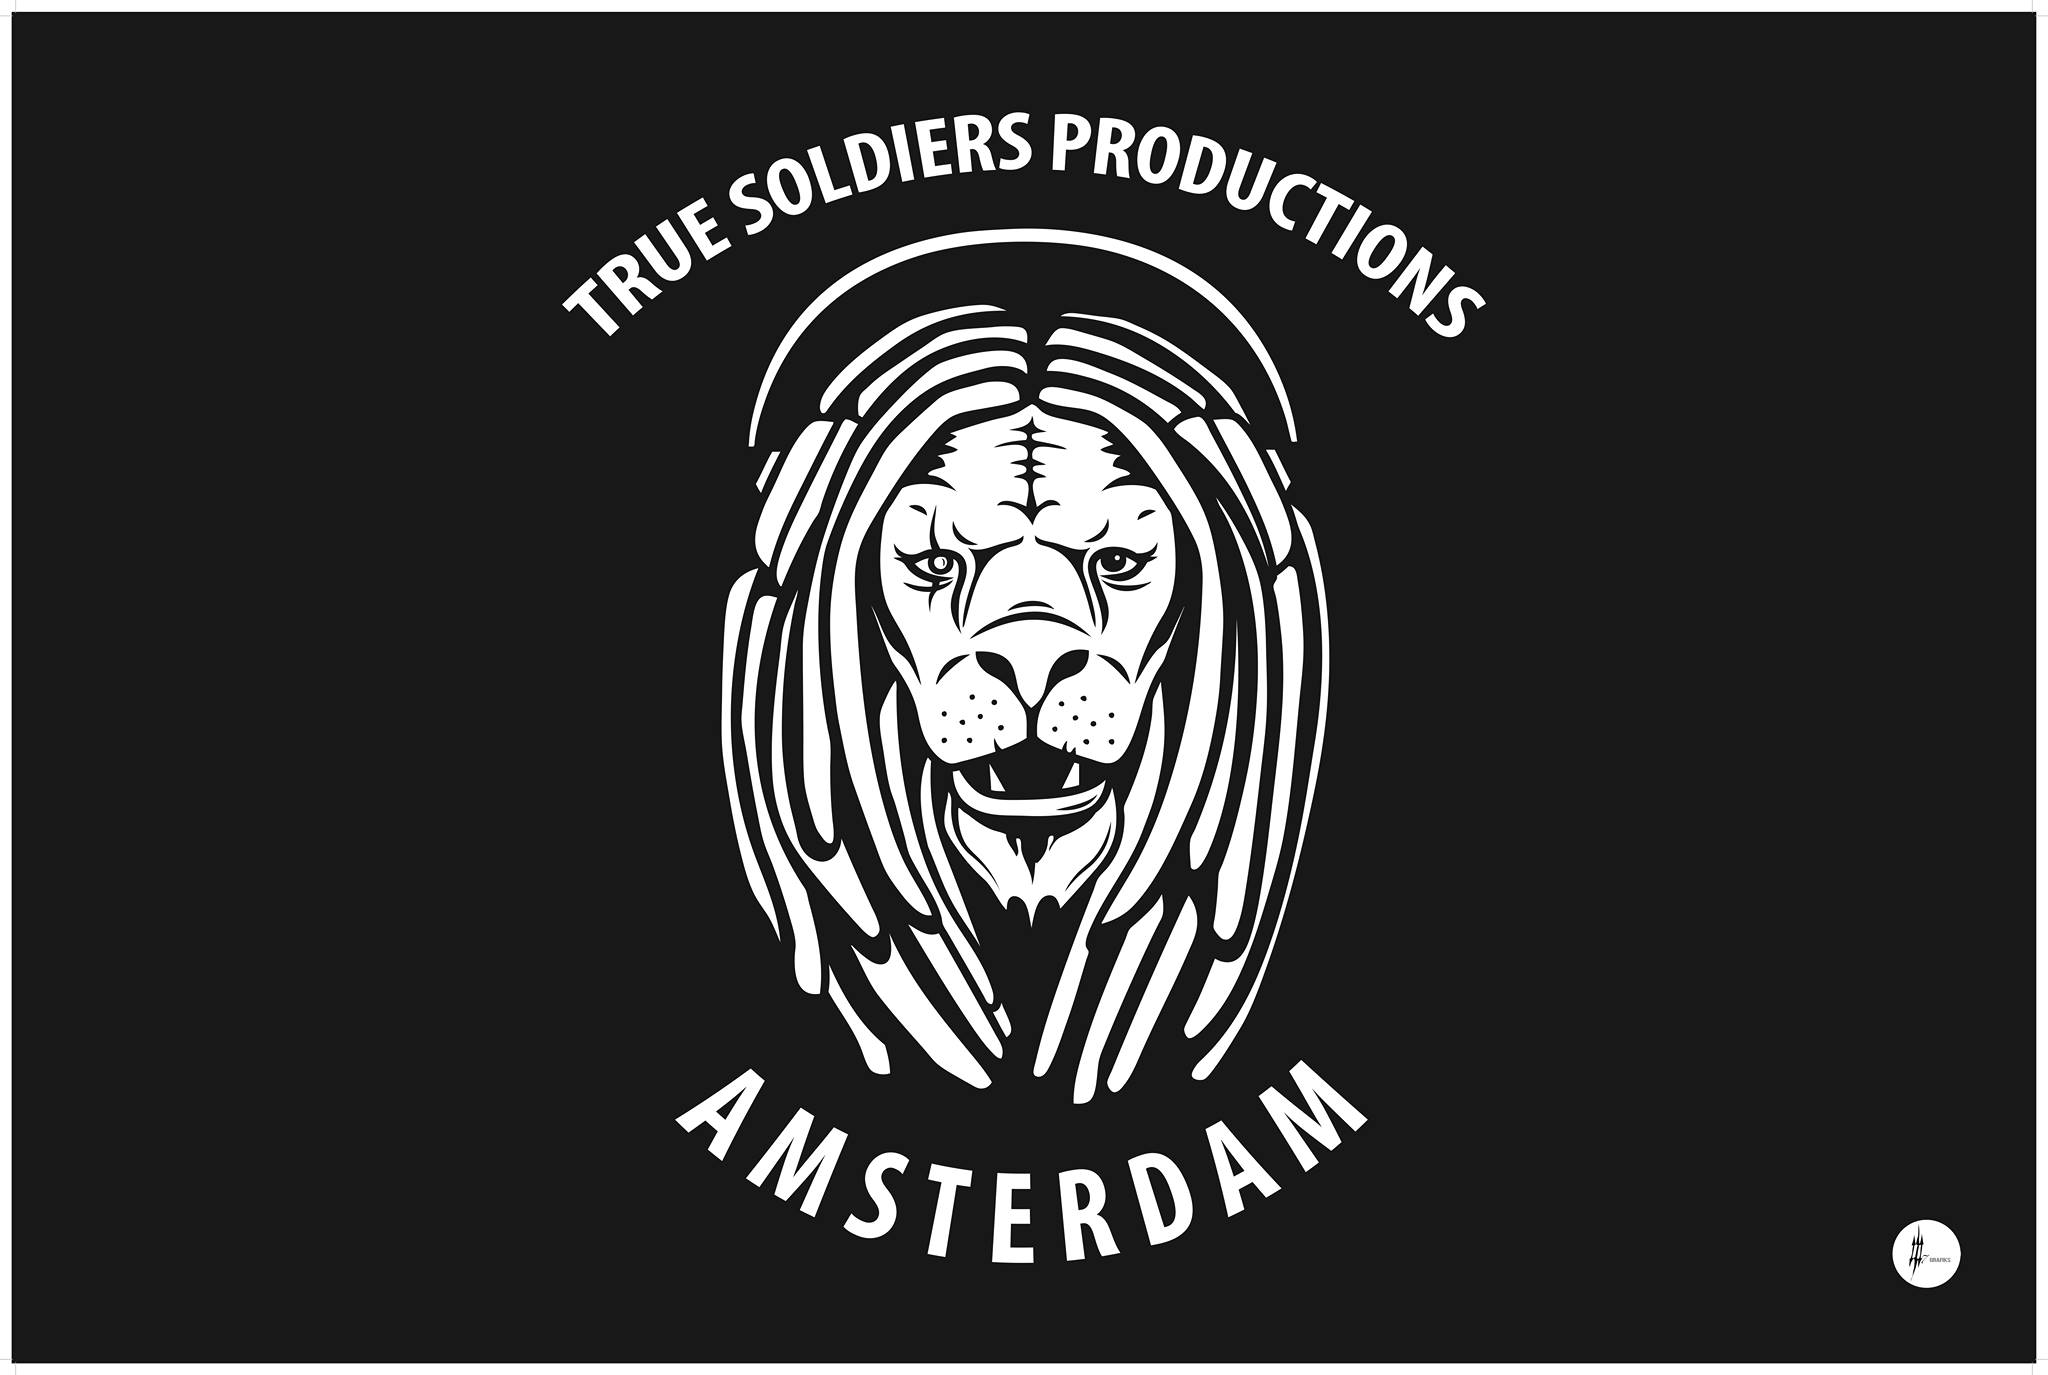 True Soldiers Productions